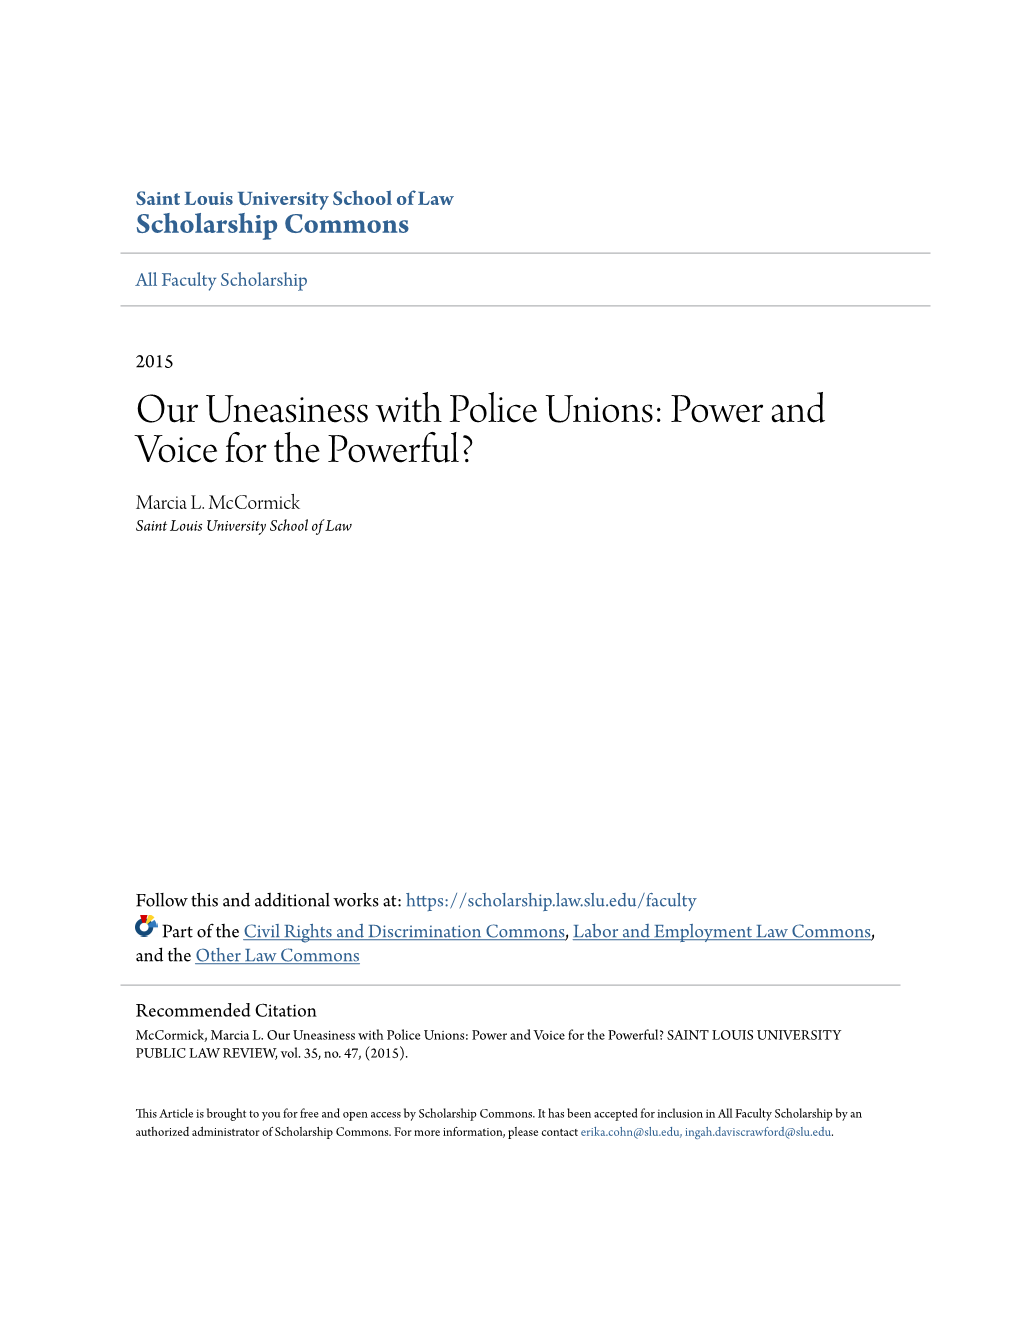 Our Uneasiness with Police Unions: Power and Voice for the Powerful? Marcia L